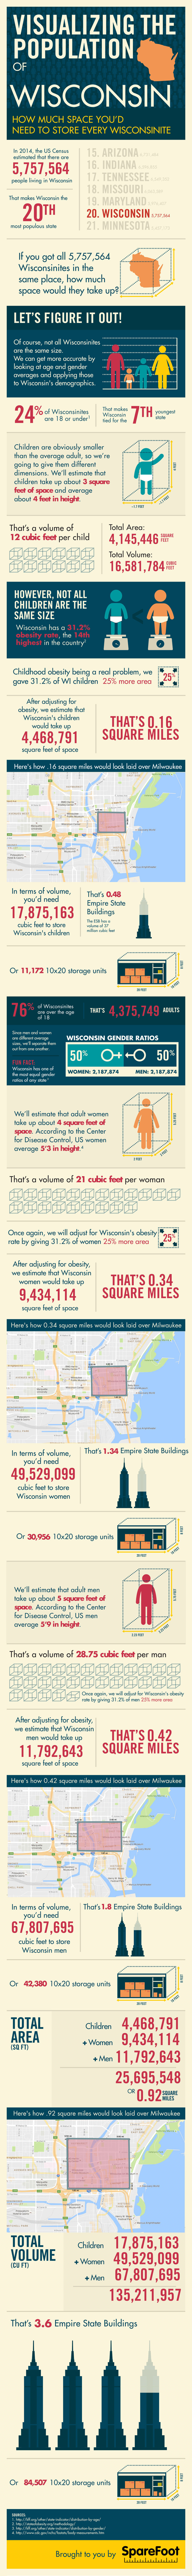 Infographic: How the state population fits into Milwaukee